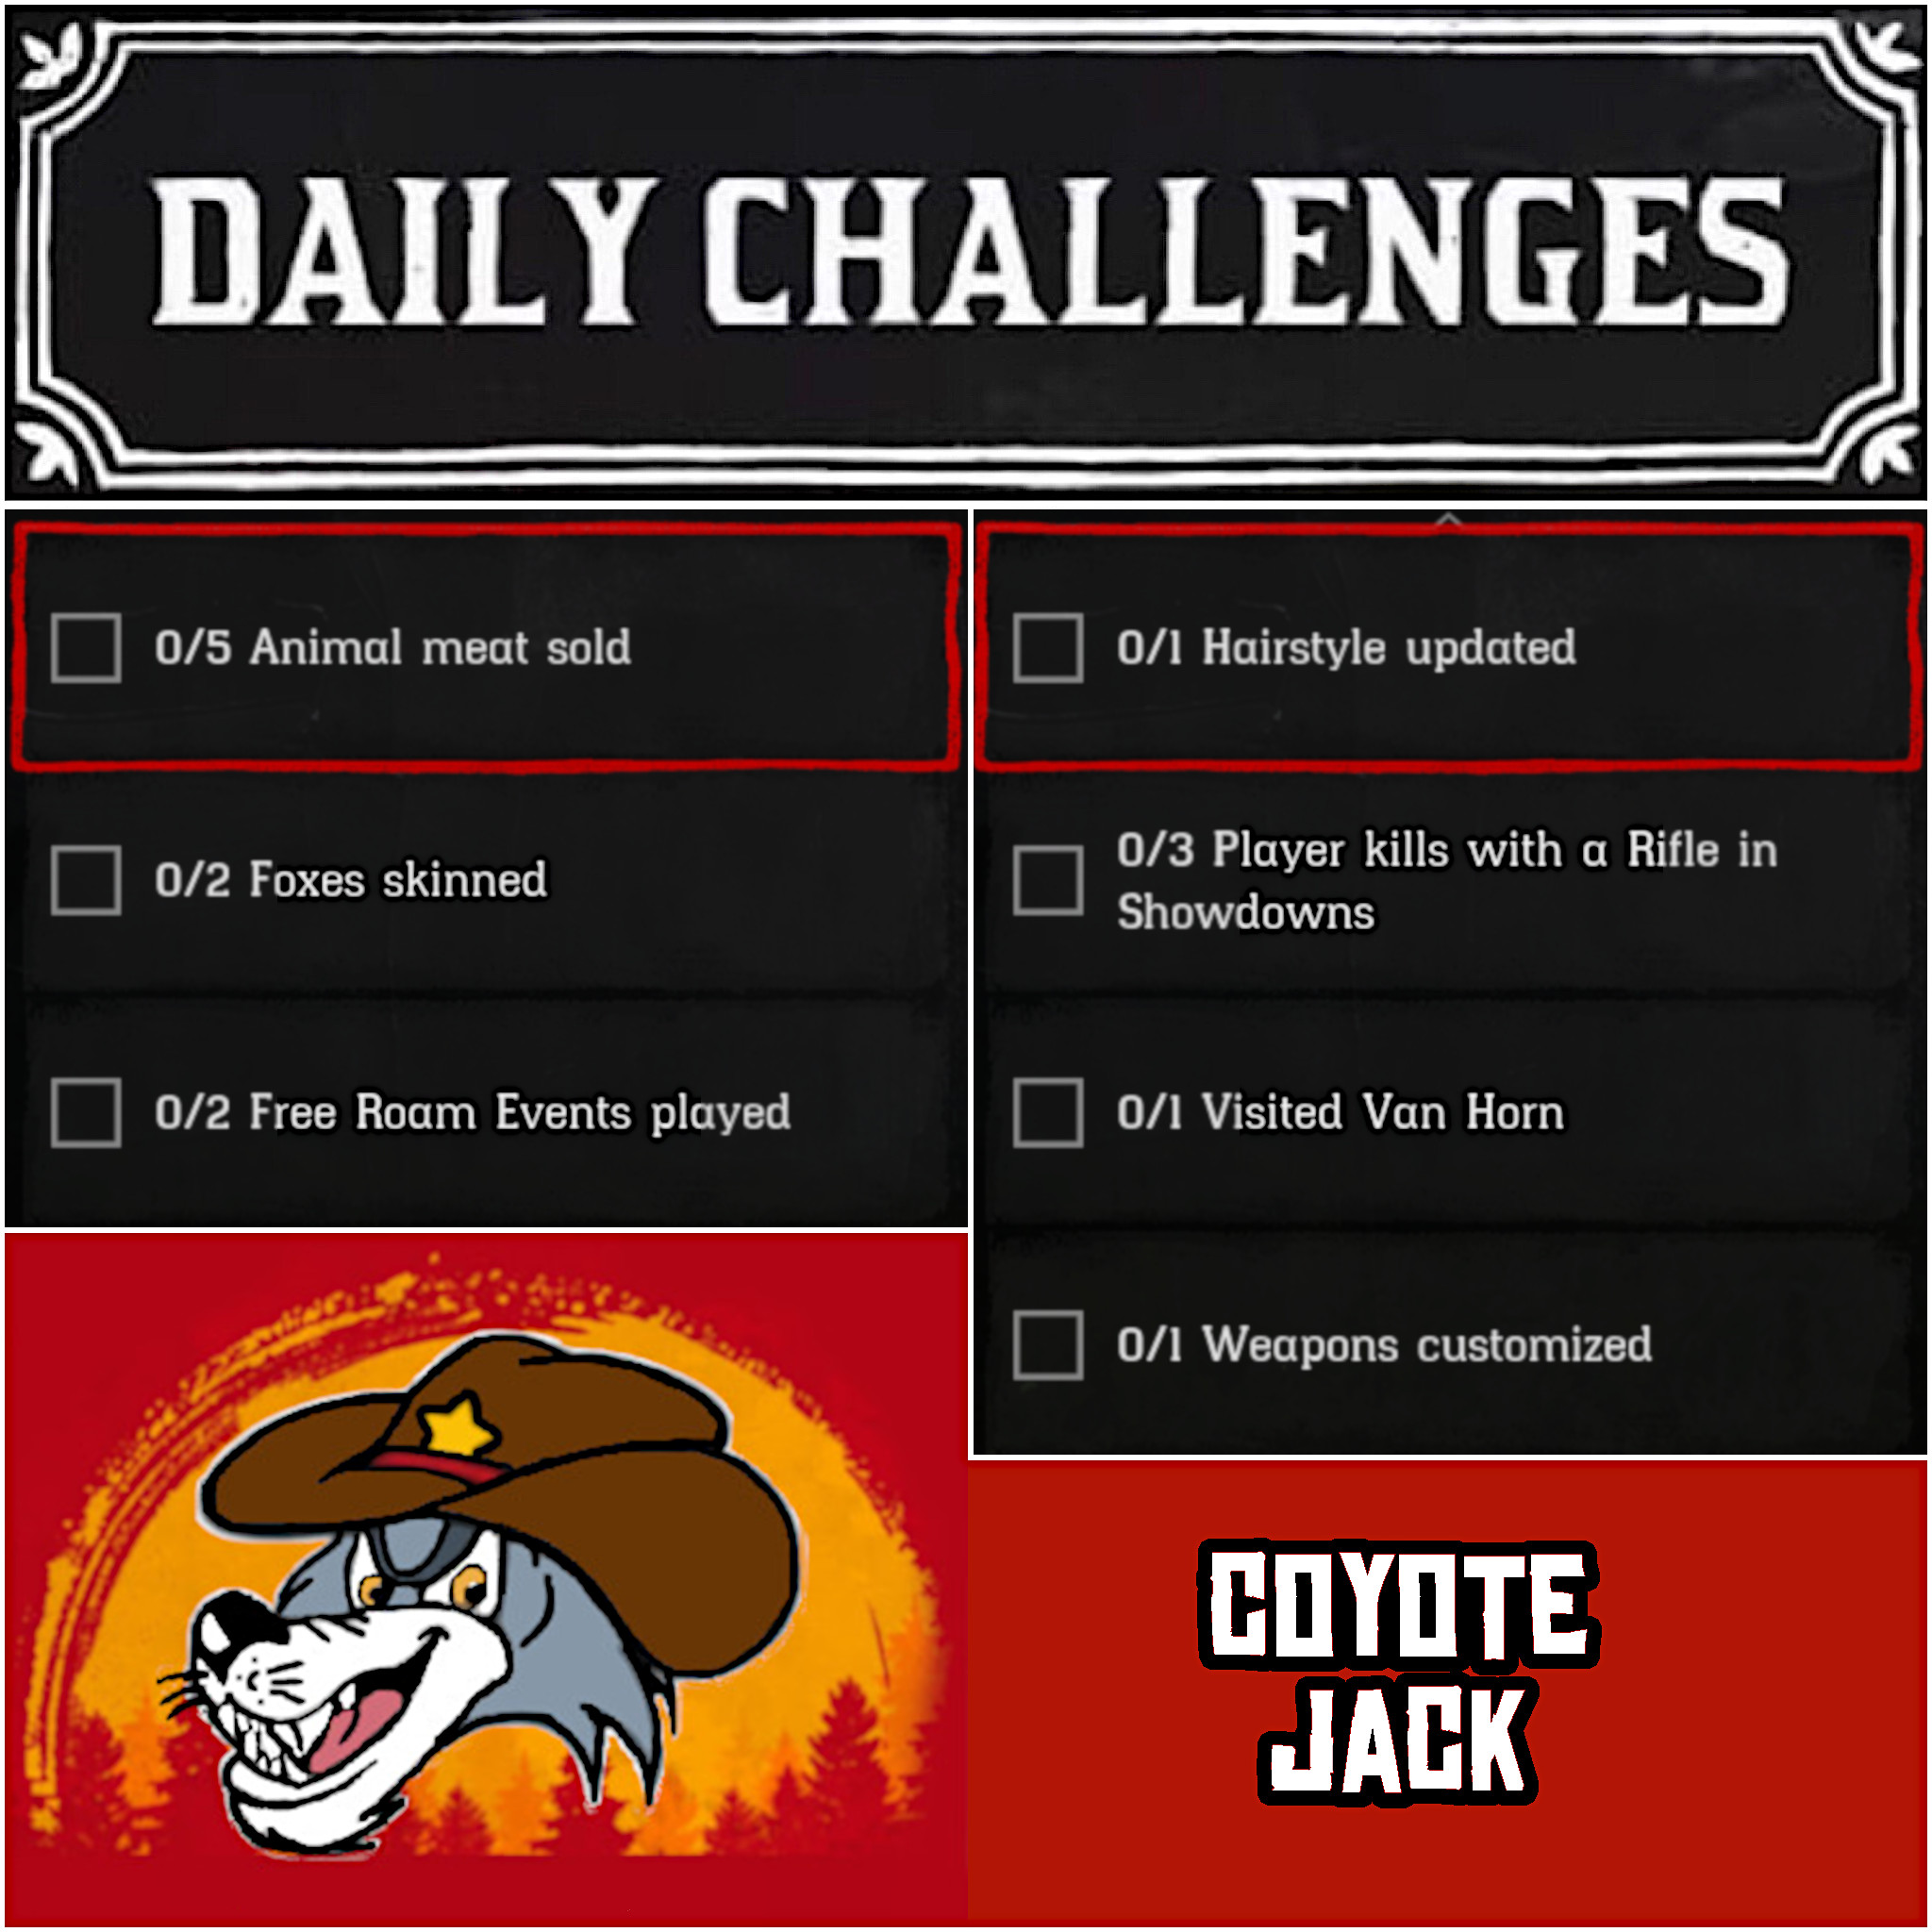 You are currently viewing Thursday 01 April Daily Challenges